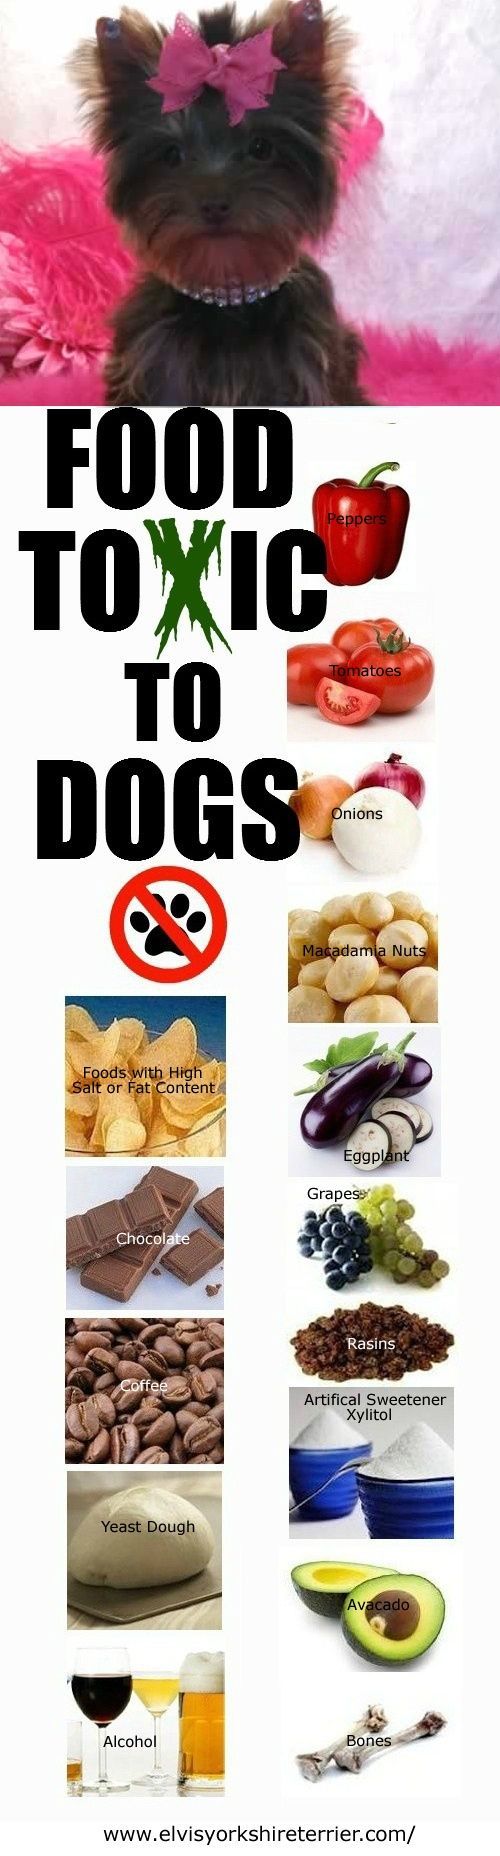 Here are some foods that ar